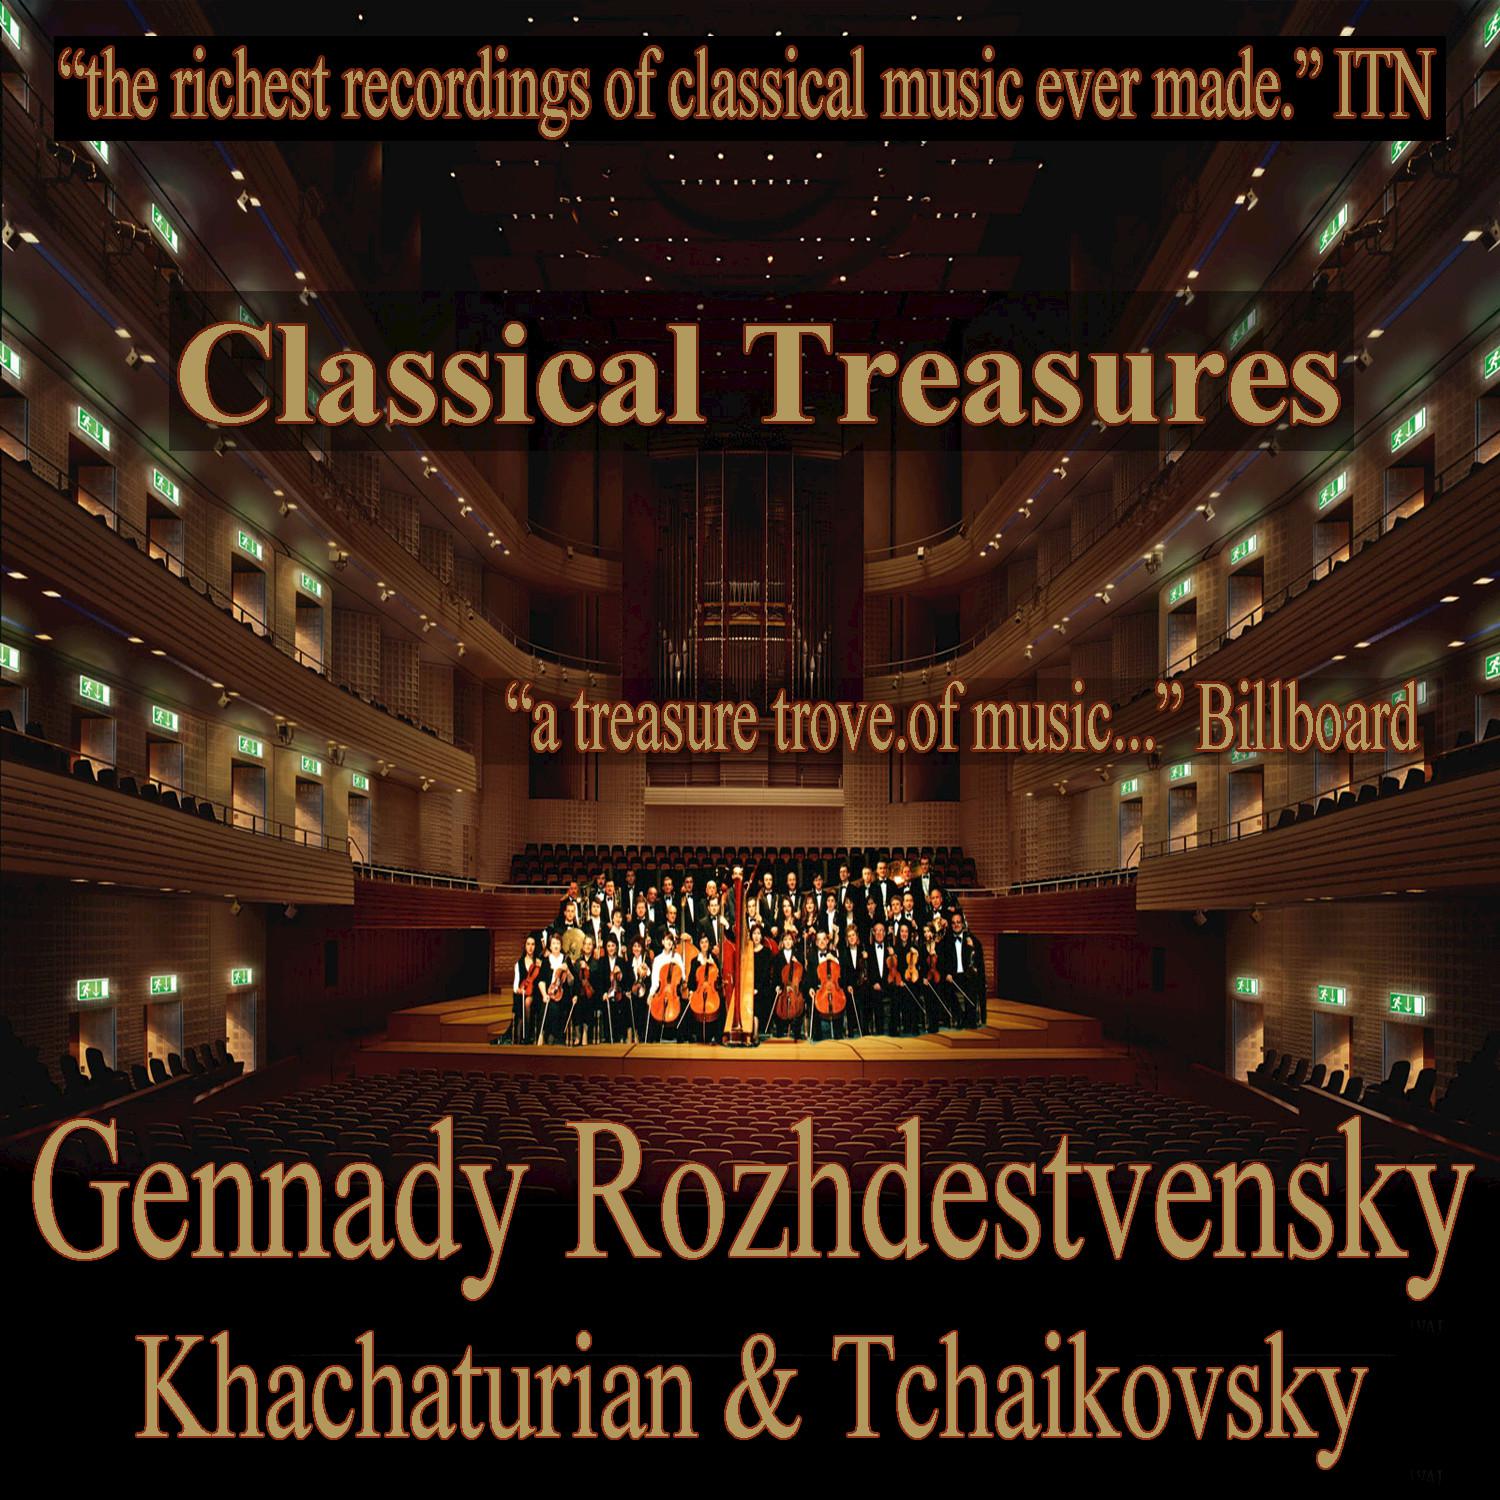 Symphony No. 1 in A Minor, Op. 12: Andantino